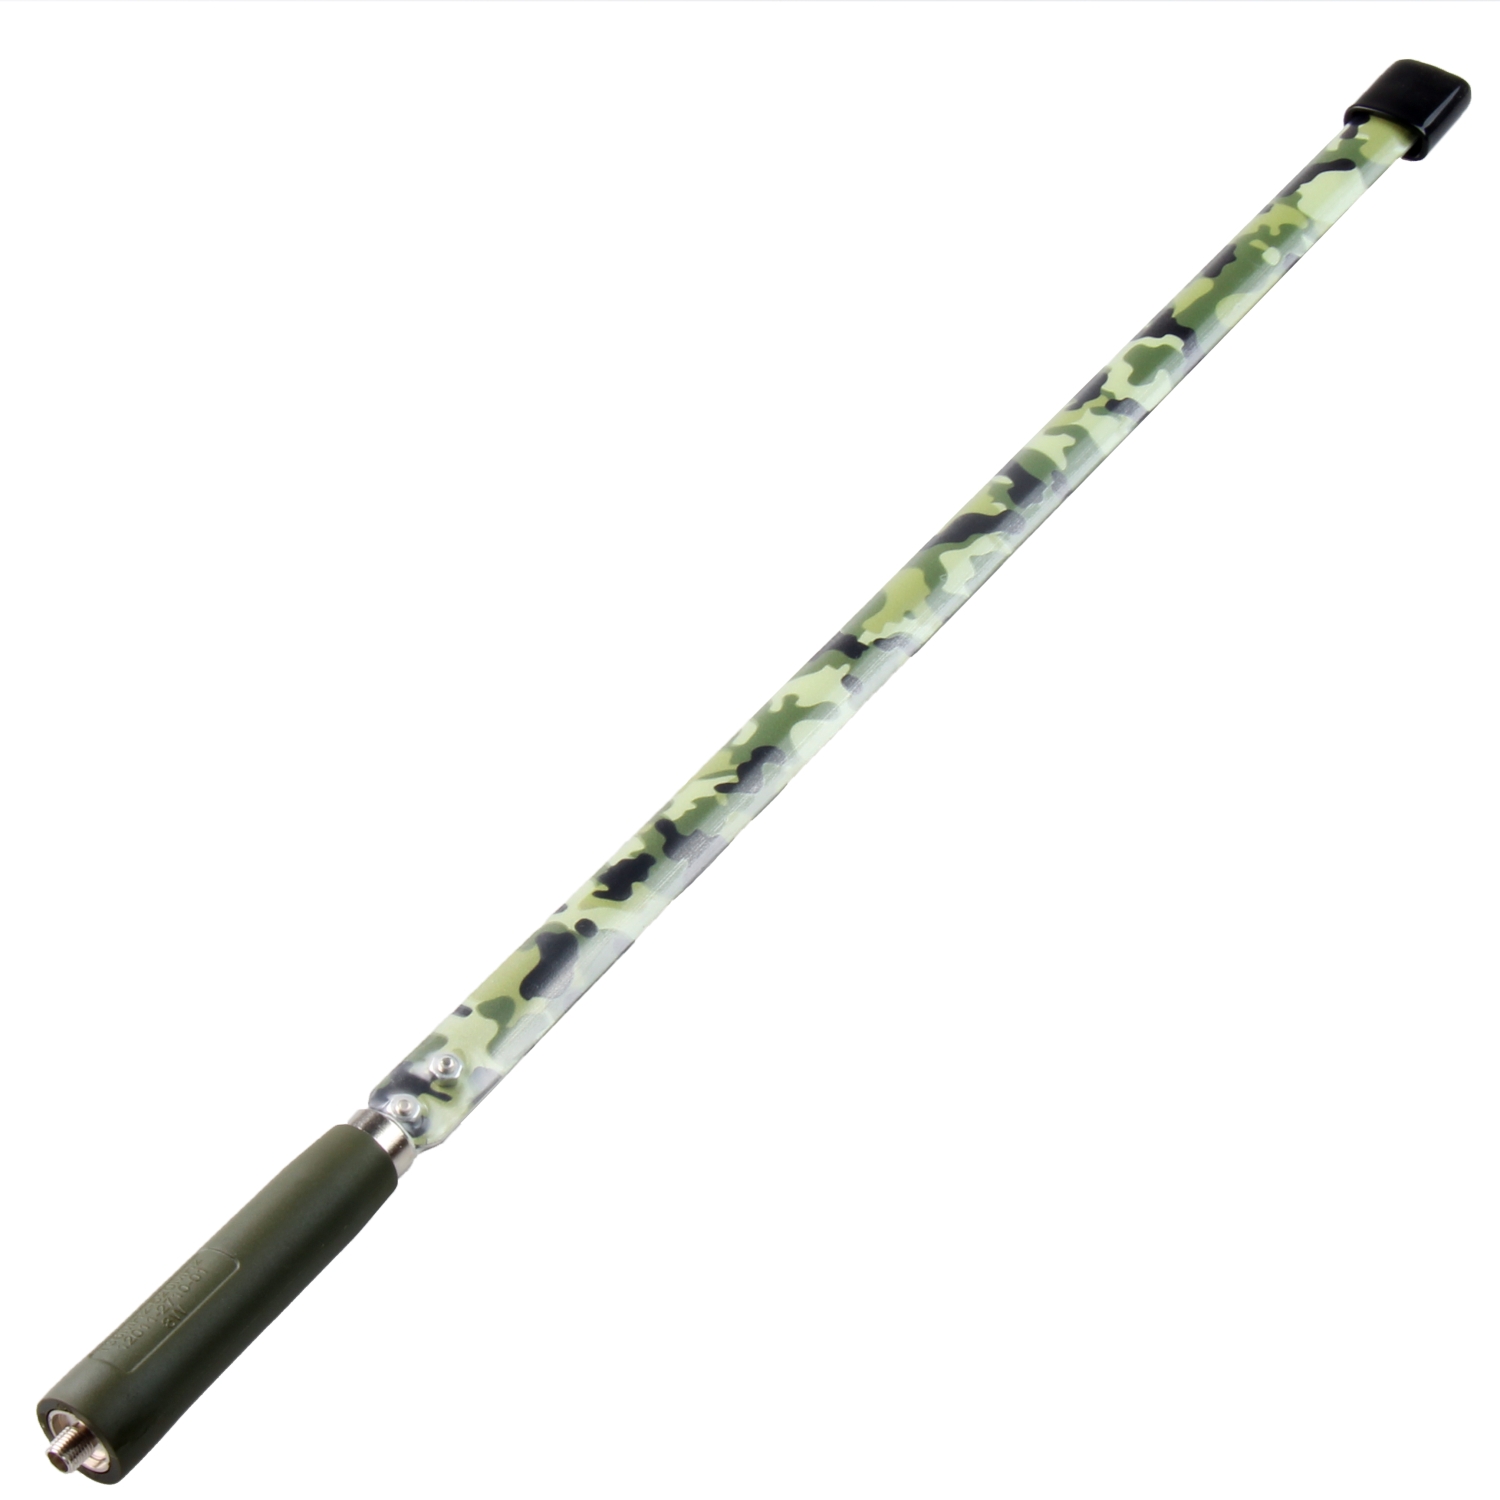 Foldable Antenna CS Tactical Antenna camouflage color SMA-Female Dual Band VHF UHF 144/430Mhz